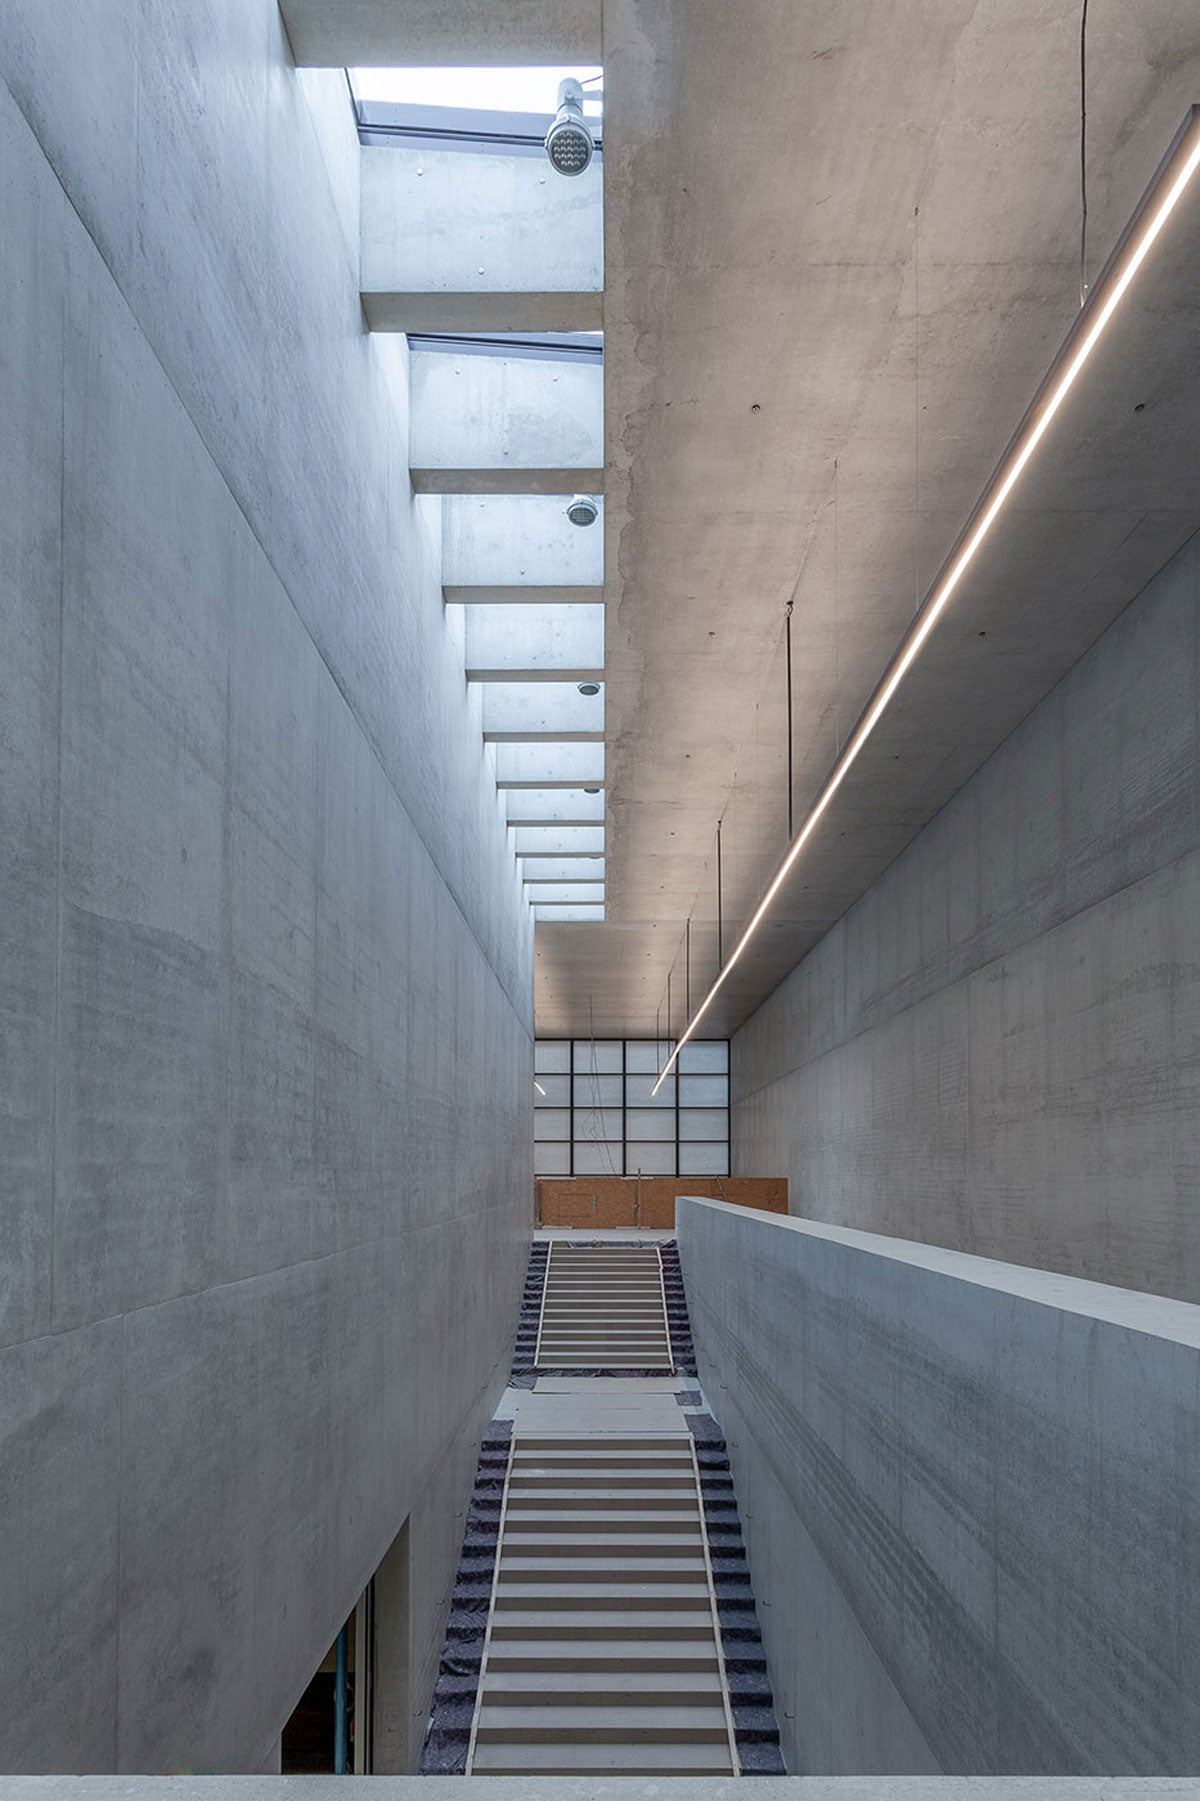 An indoor stairway leads directly to the second floor. Photo: BBR / SPK / Björn Schumann